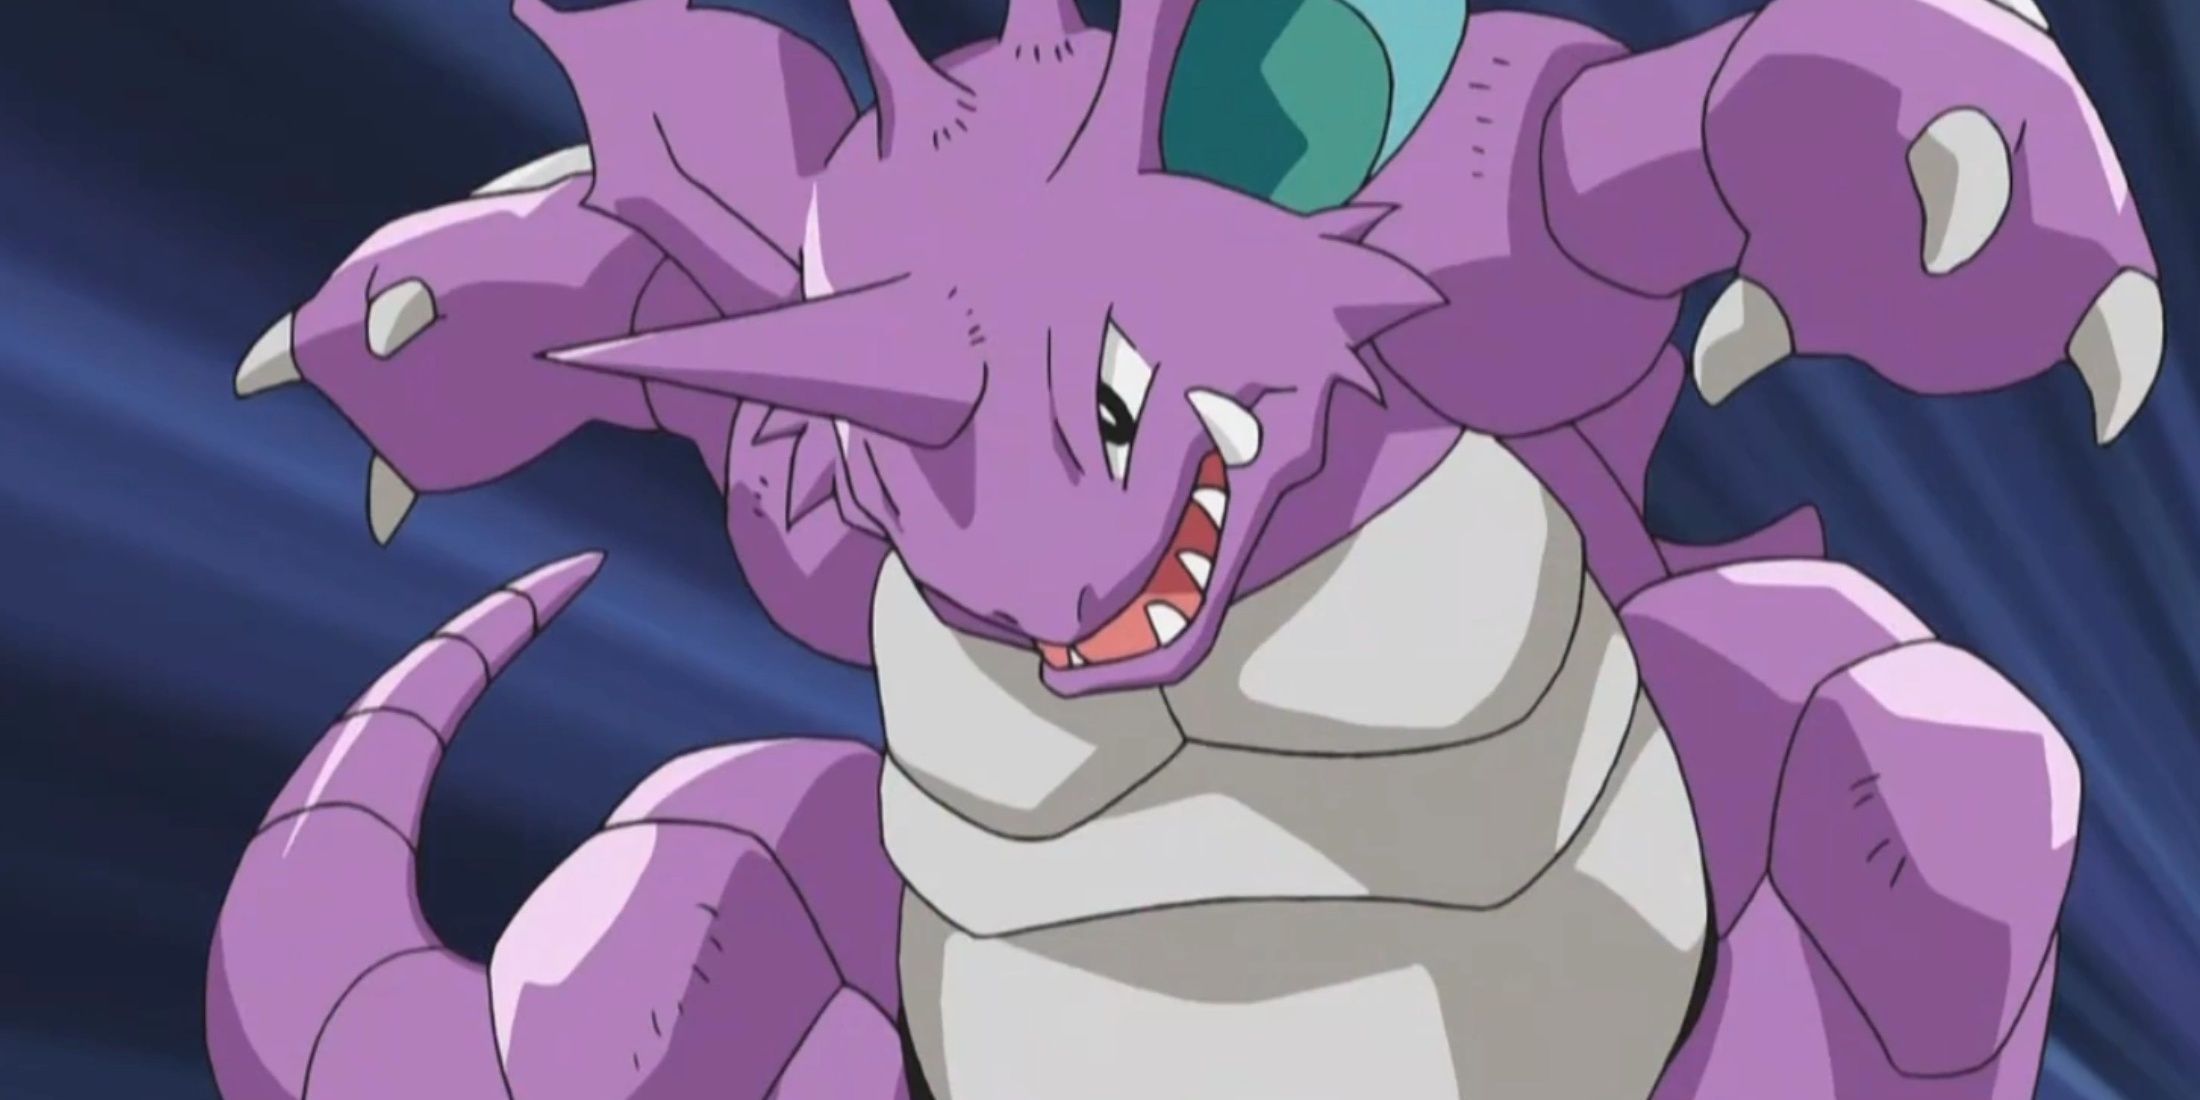 Nidoking attacks with its horn in Pokemon Stadium.